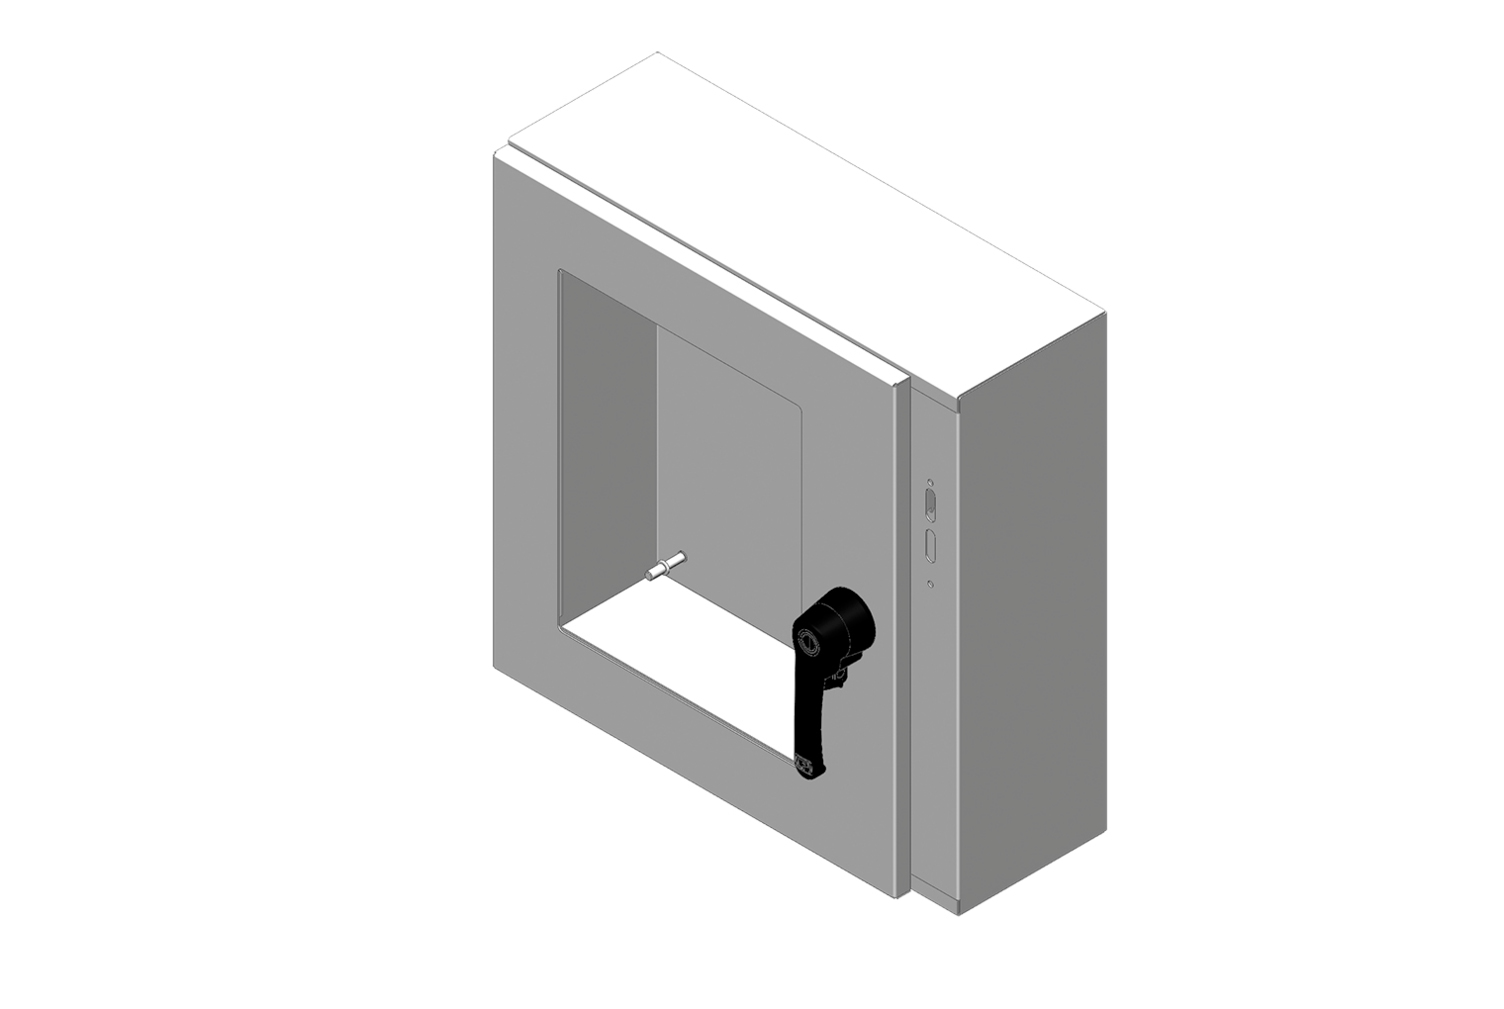 RMR Standard Wall-Mount Disconnect Enclosure, Type 4, with Solid Single Door - Image 4